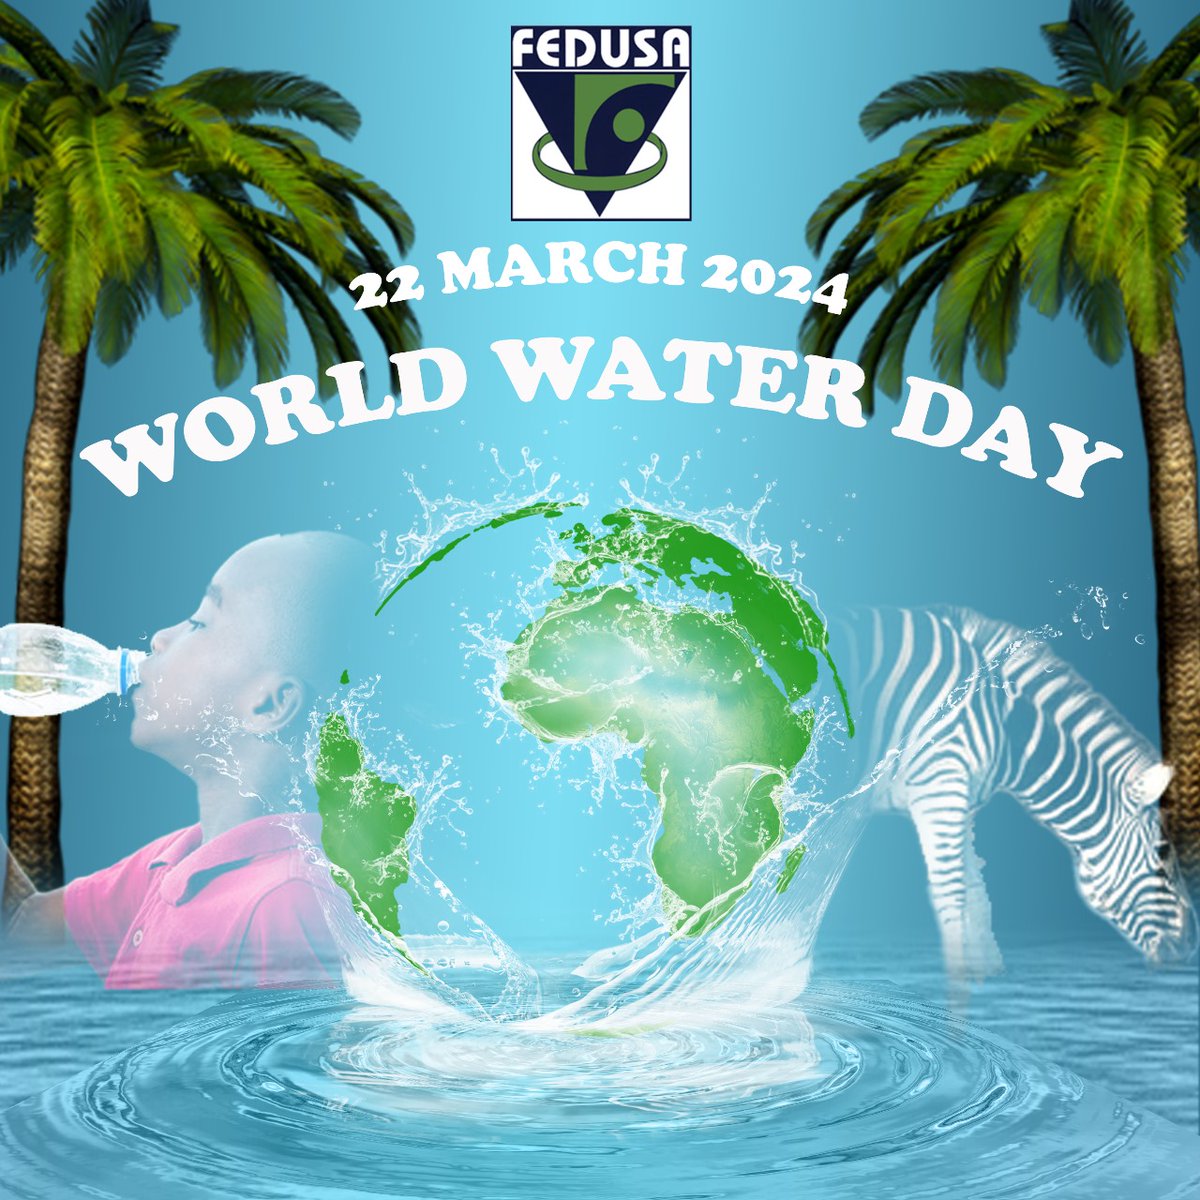 Access to clean, fresh water is a basic human right and should not be a privilege. To mark World Water Day under the theme 'Water for peace' FEDUSA urges the government to provide clean and quality water to its citizens. #WorldWaterDay #cleanwater #WaterDay